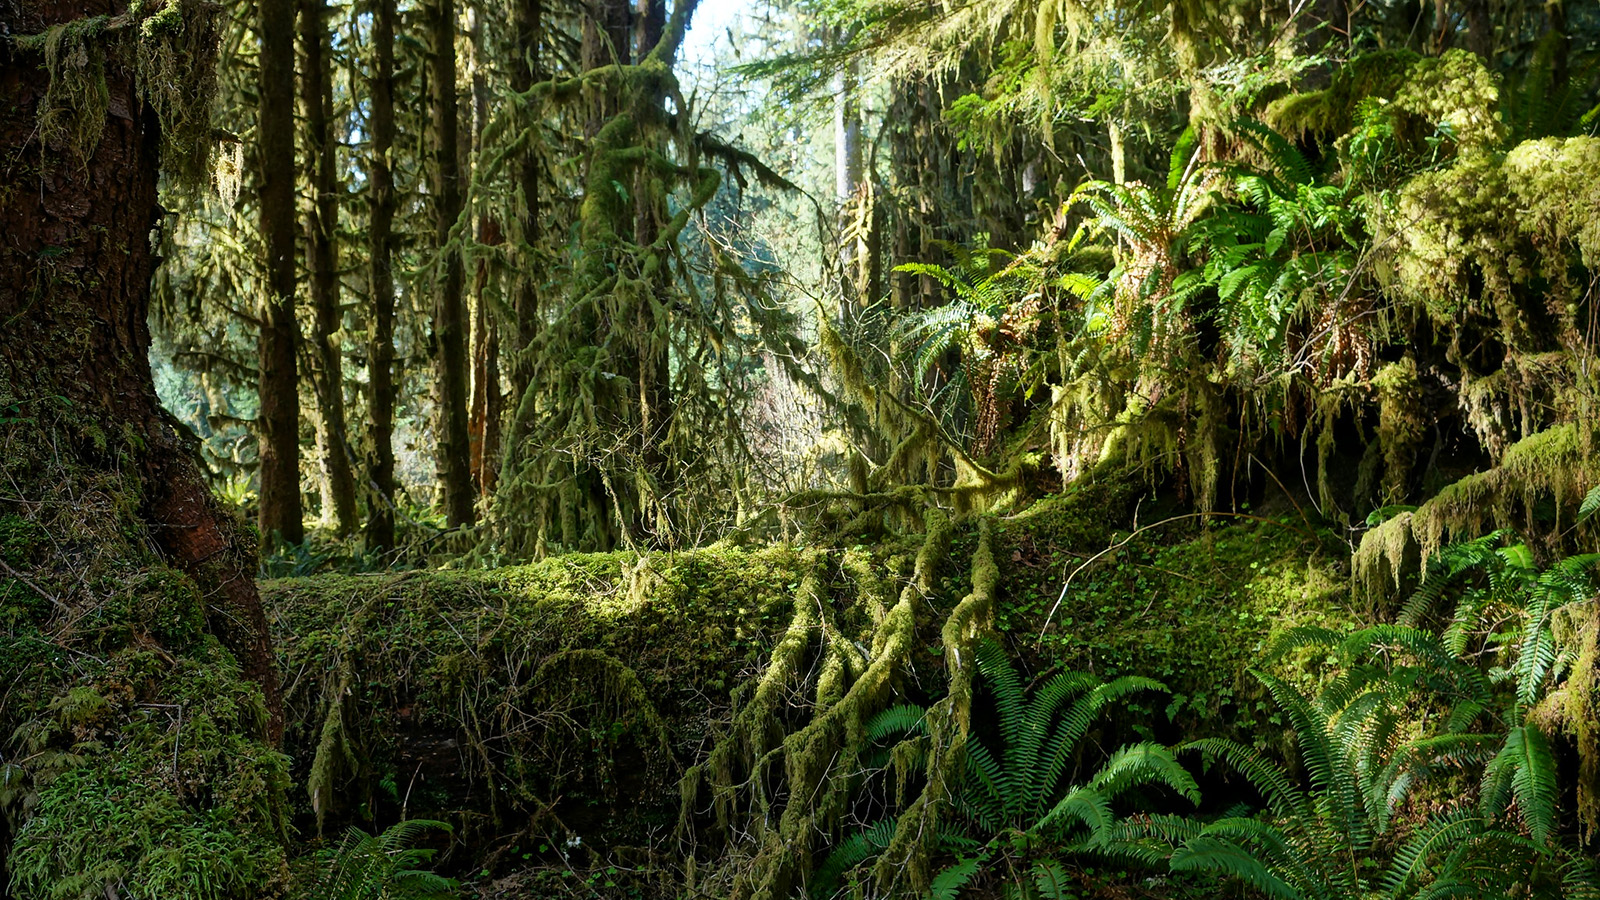 Forest photo gallery: Explore the rainforests of America